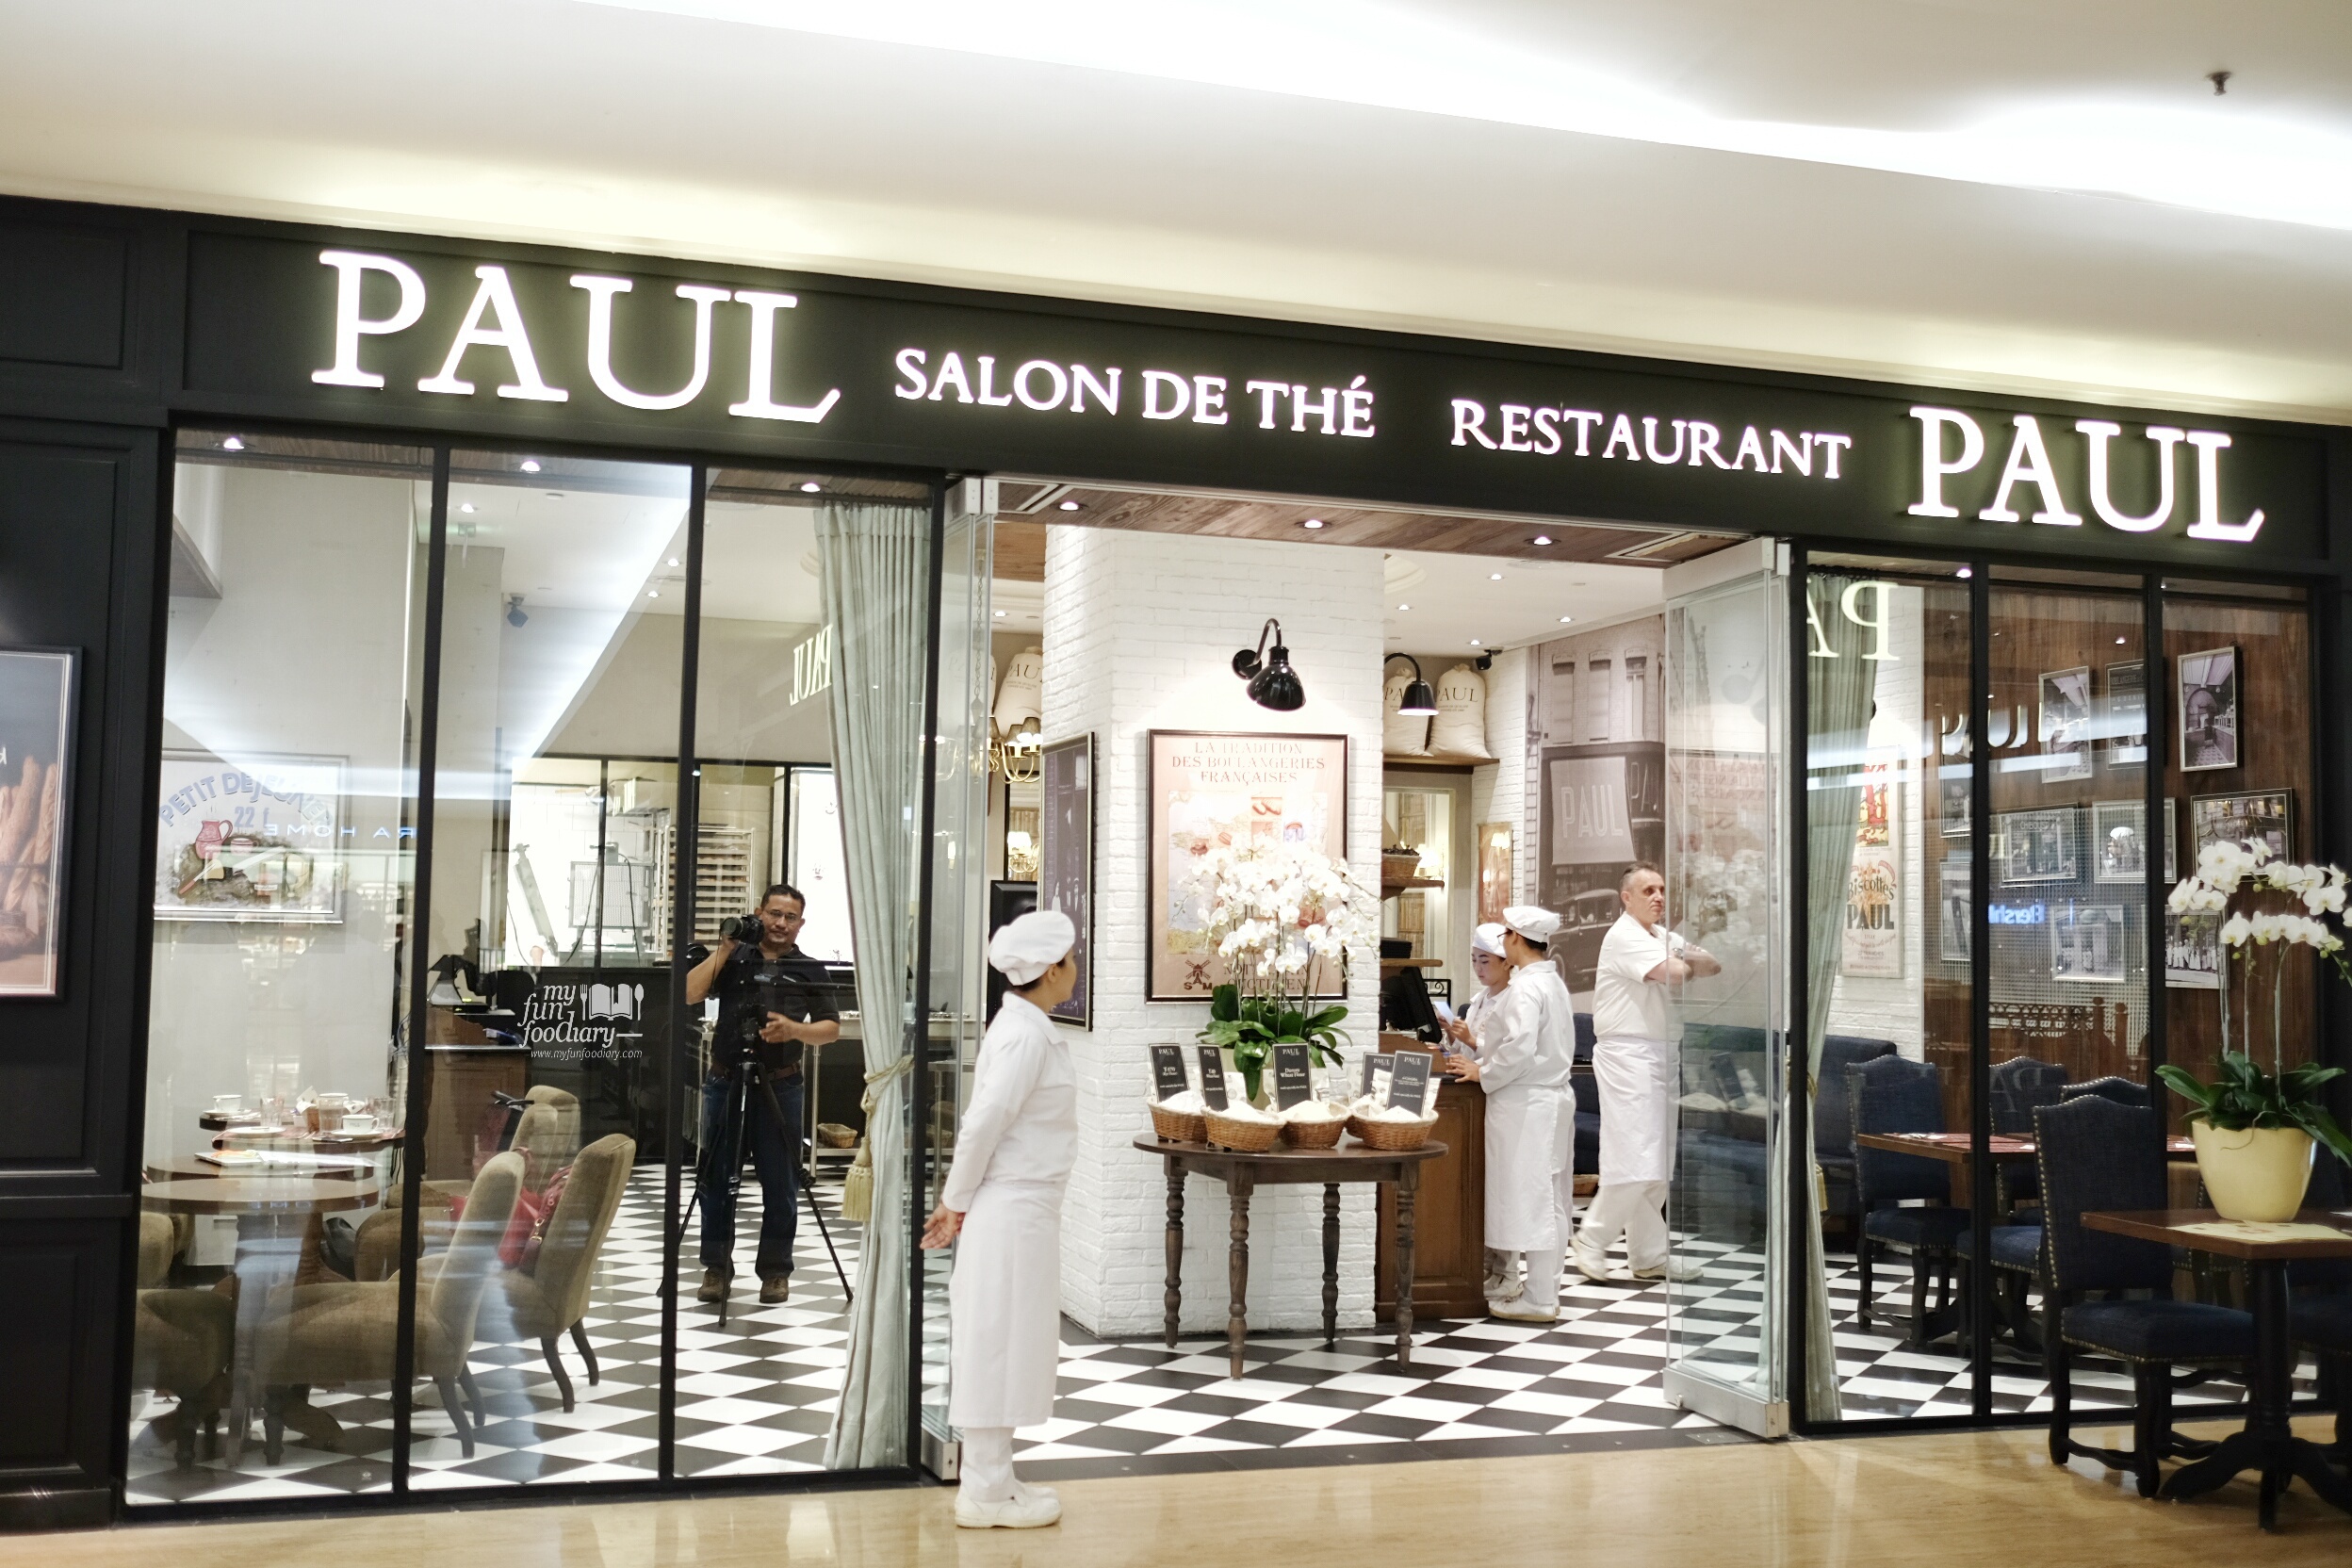 Paul Indonesia newest branch at Plaza Indonesia by Myfunfoodiary